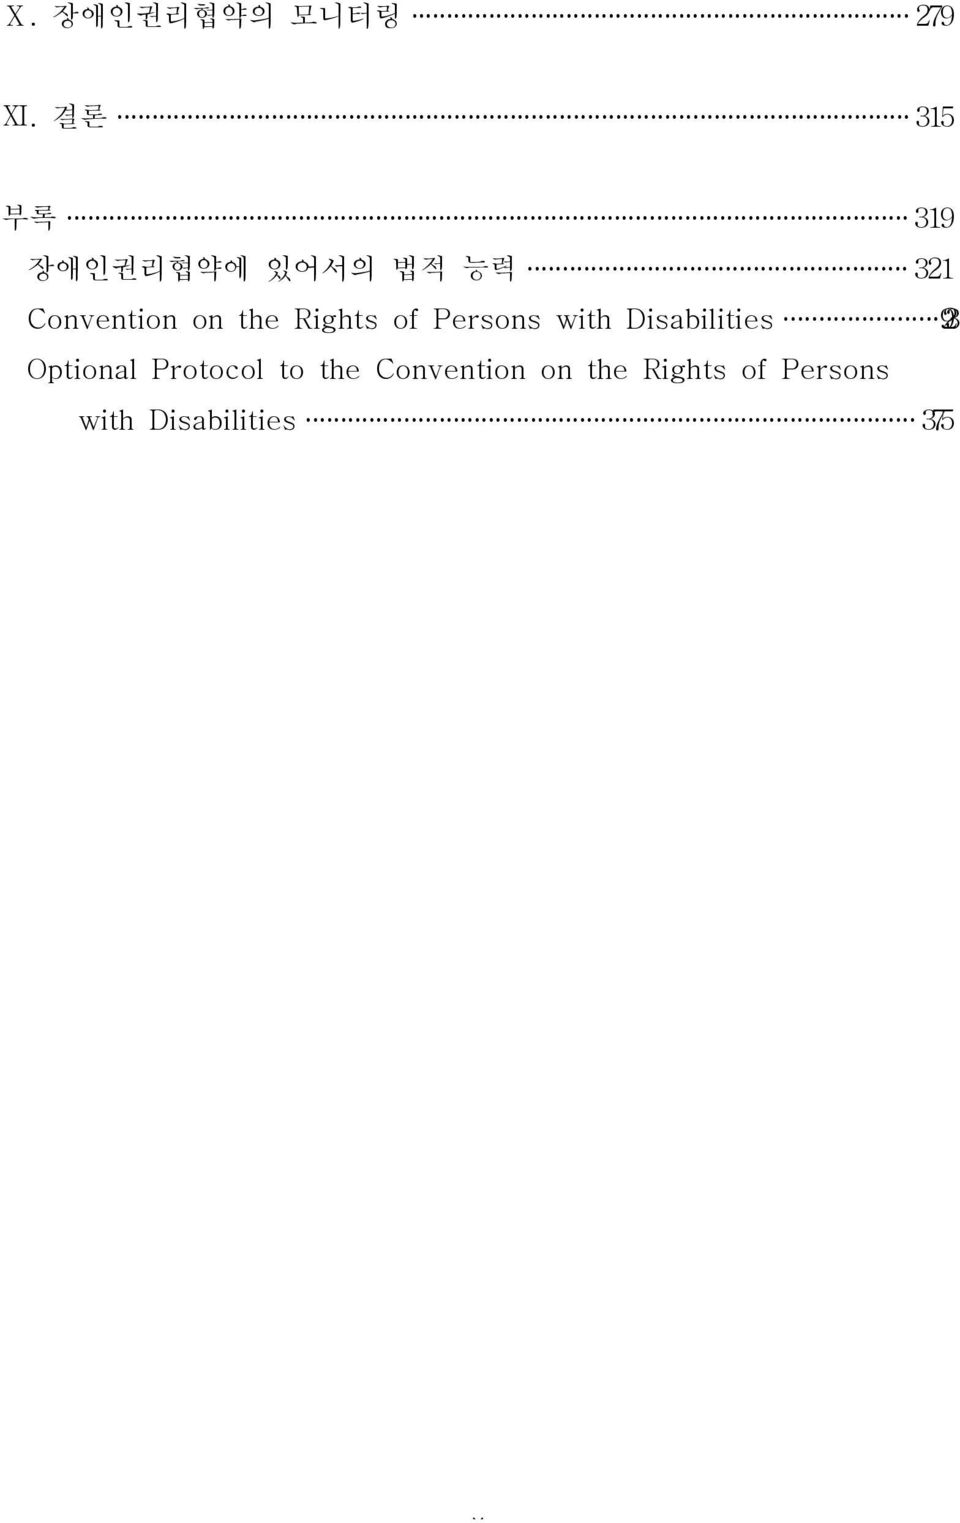 the Rights of Persons with Disabilities 329